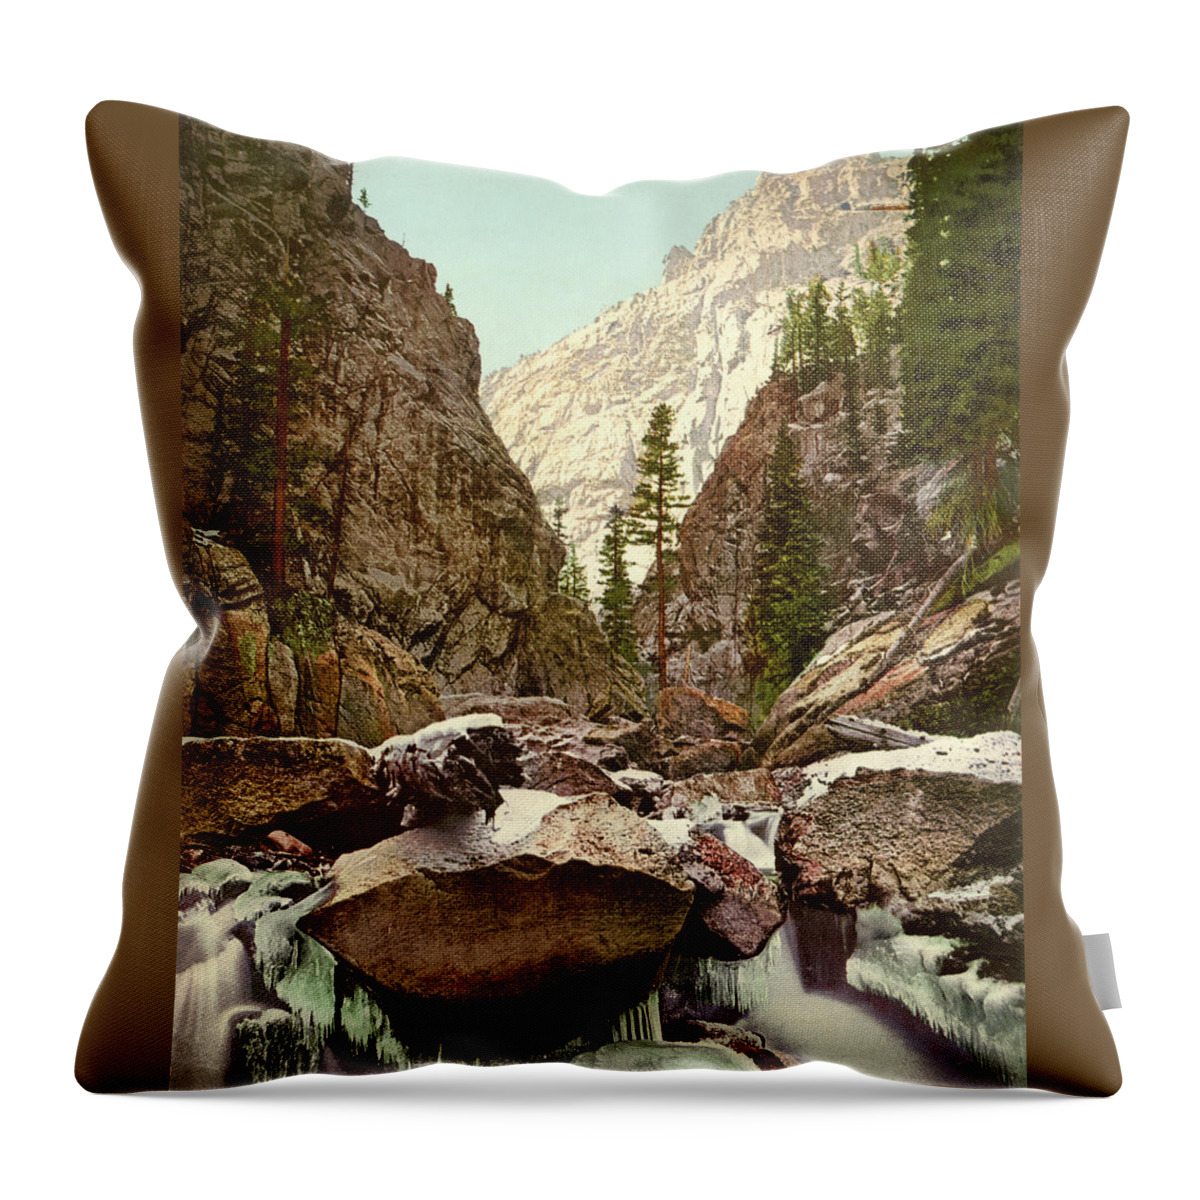  Throw Pillow featuring the photograph Toltec Gorge by Detroit Photographic Company